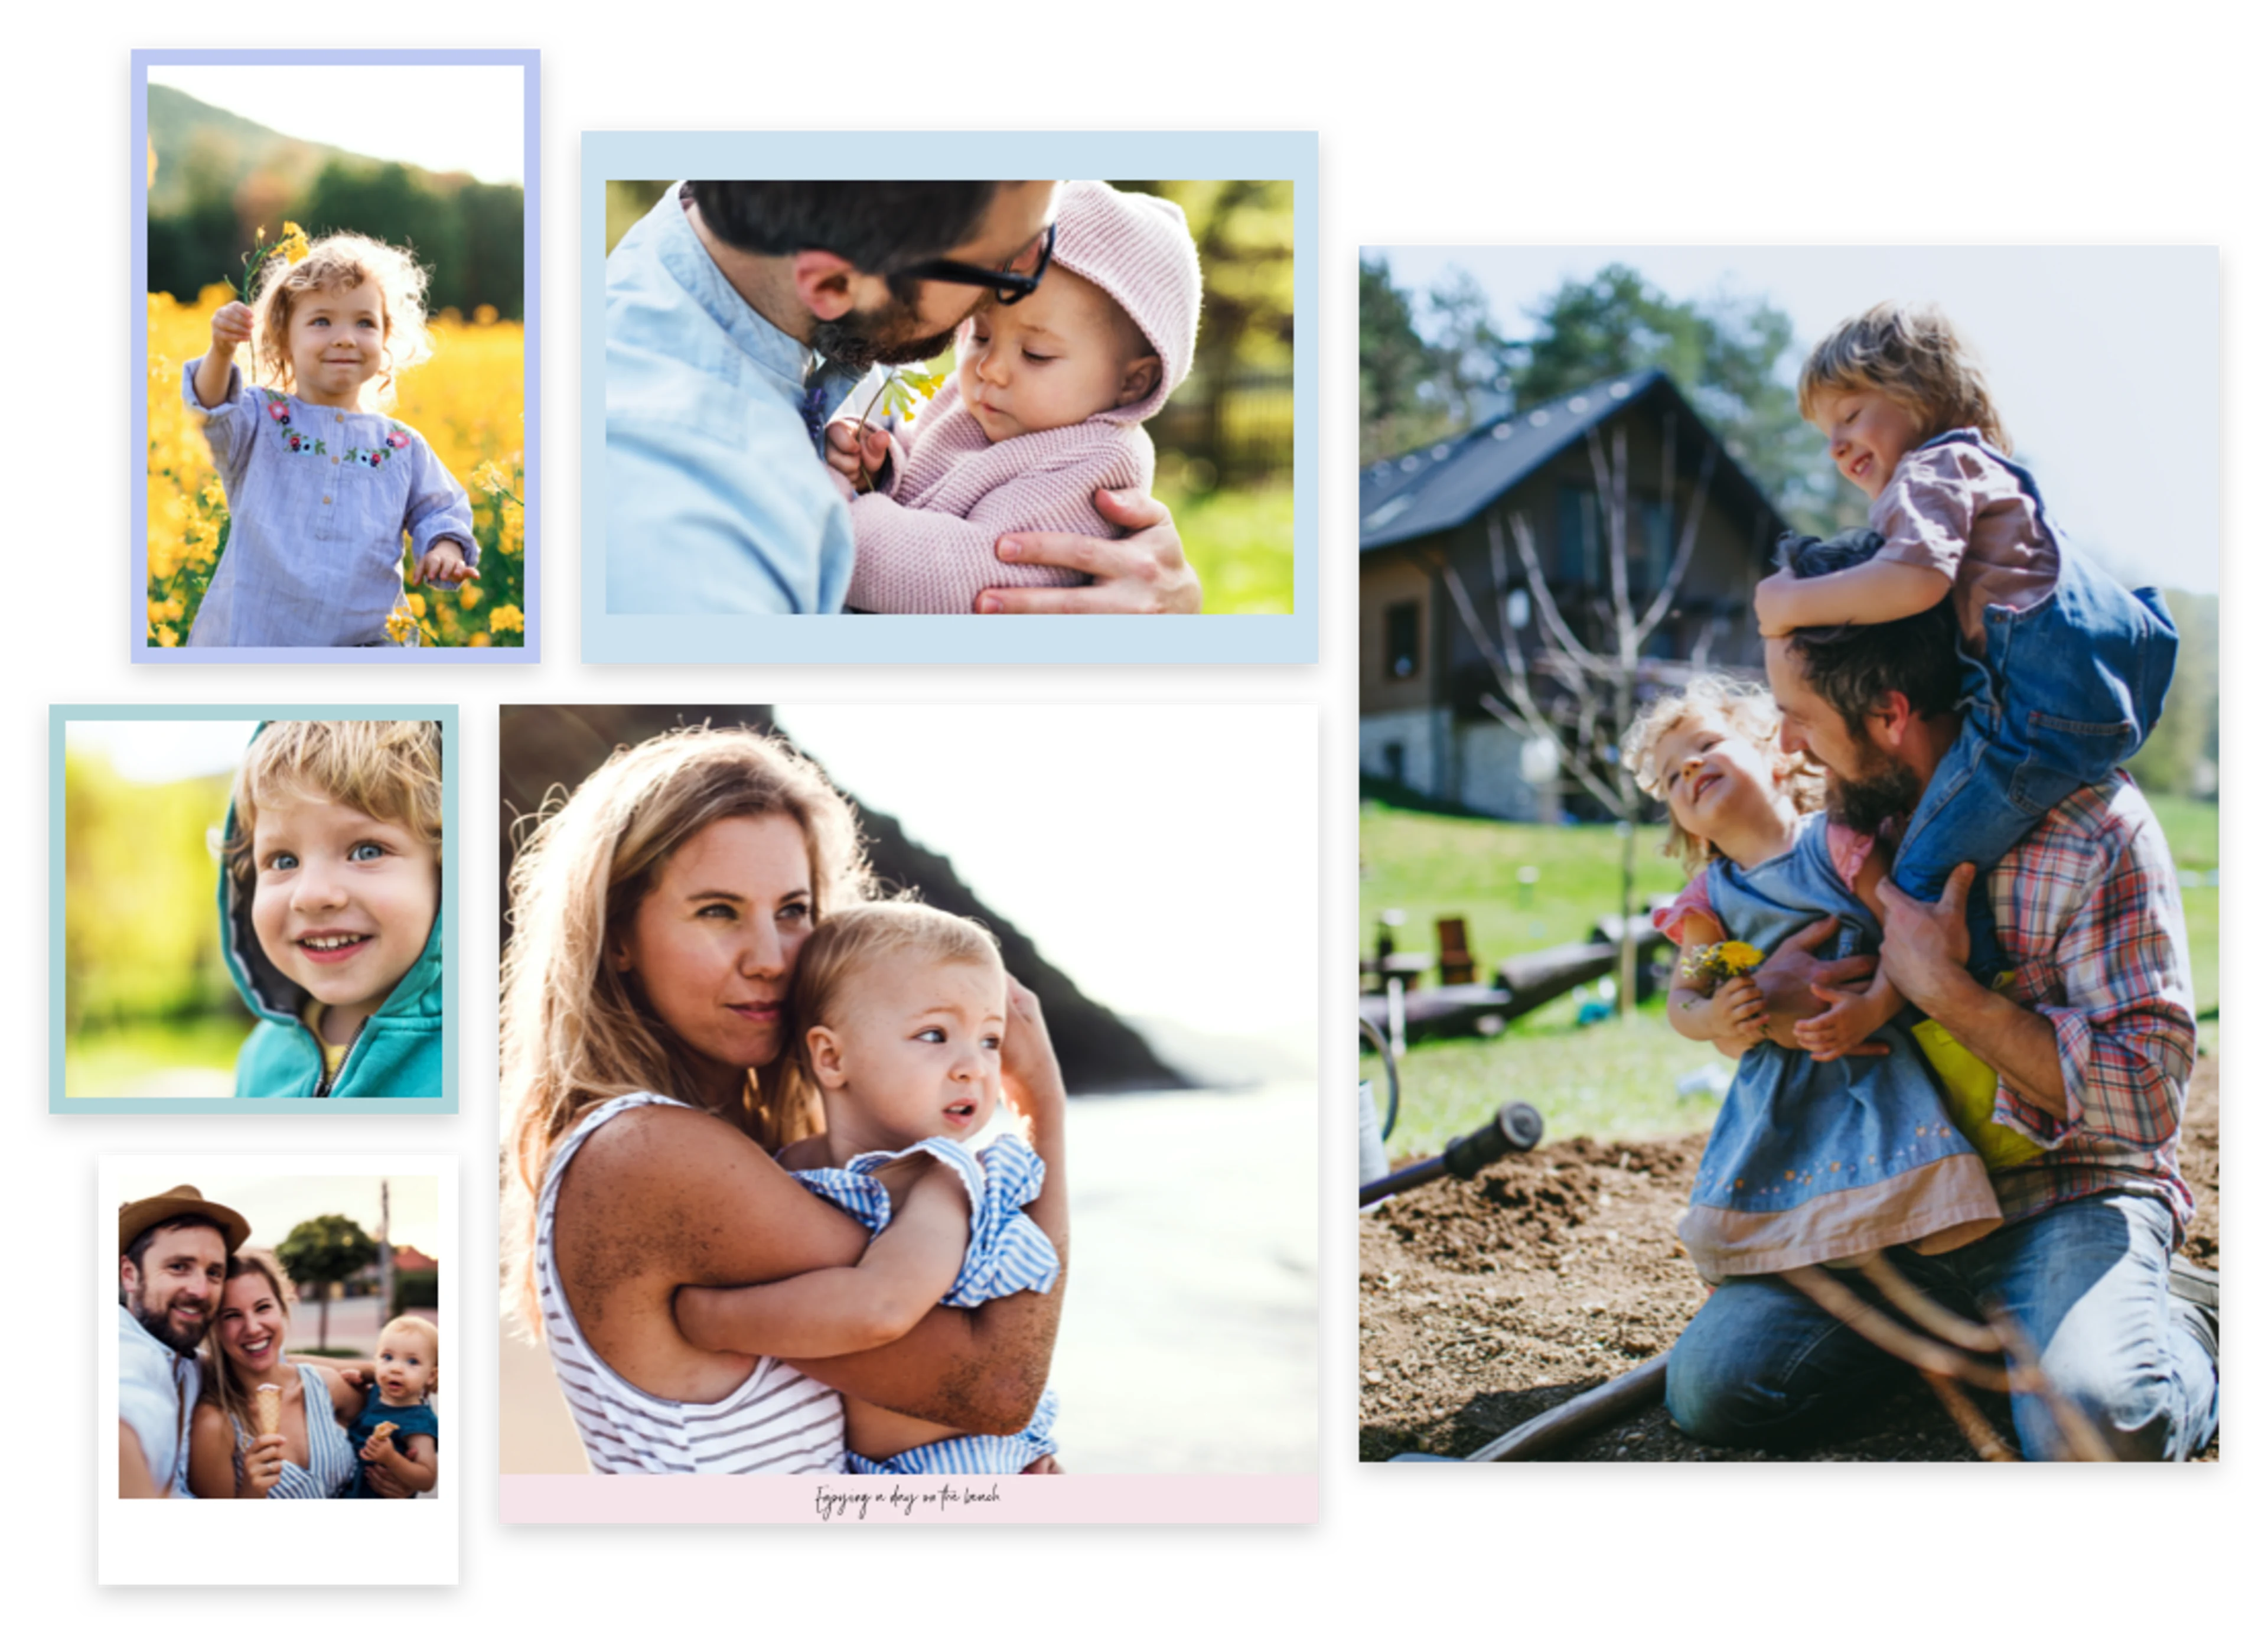 Photo Prints All Sizes and Formats